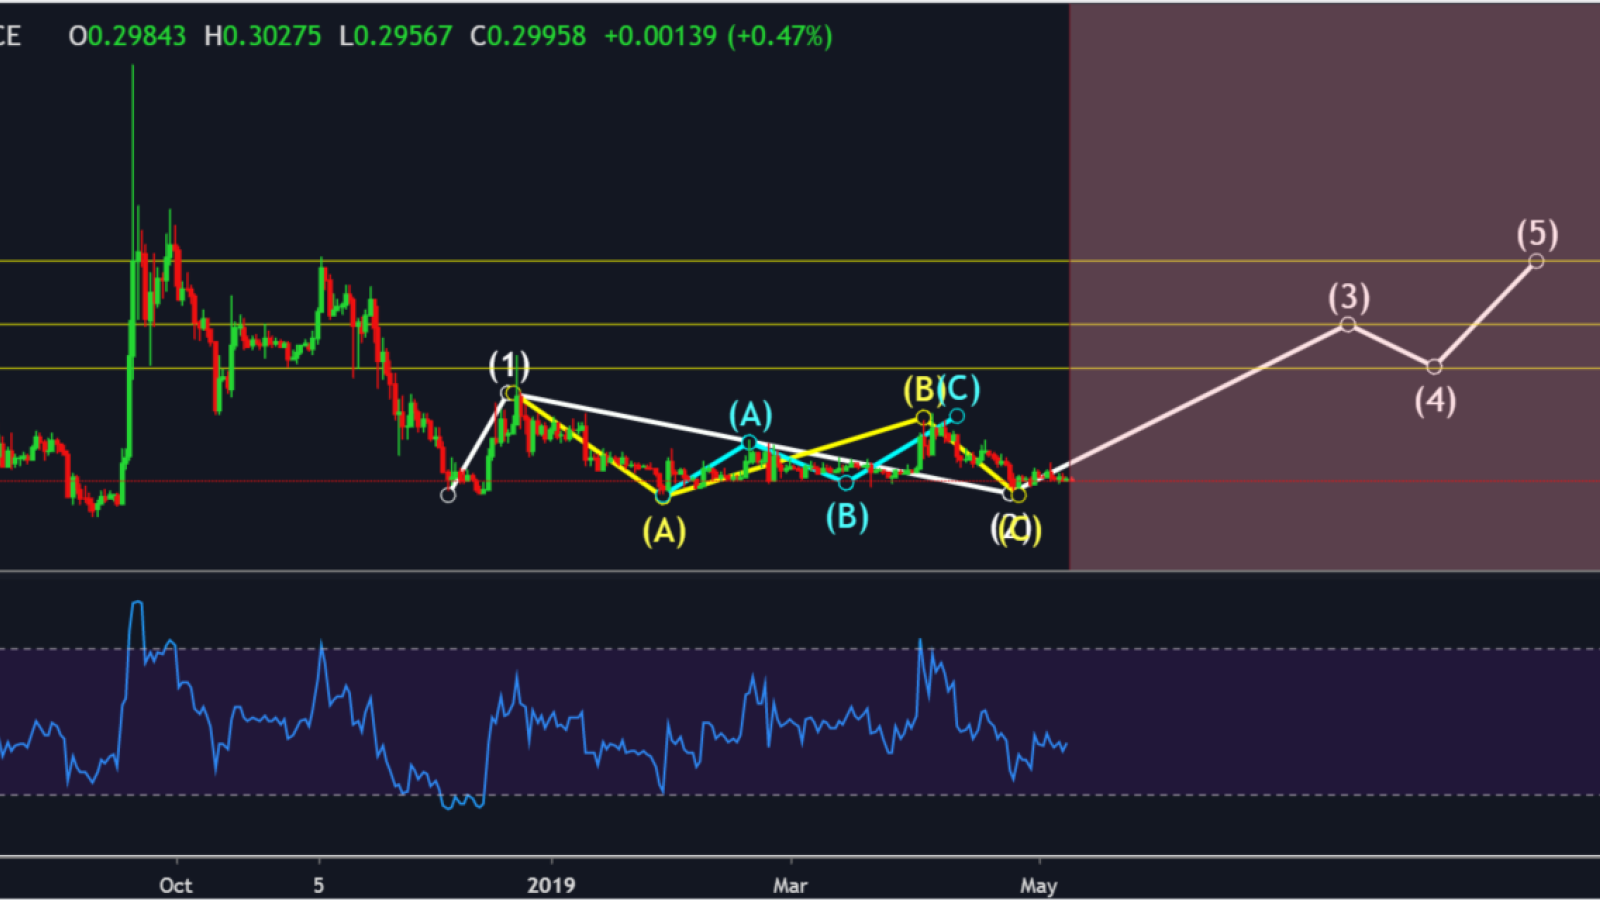 Will XRP reach the $0.50 target?